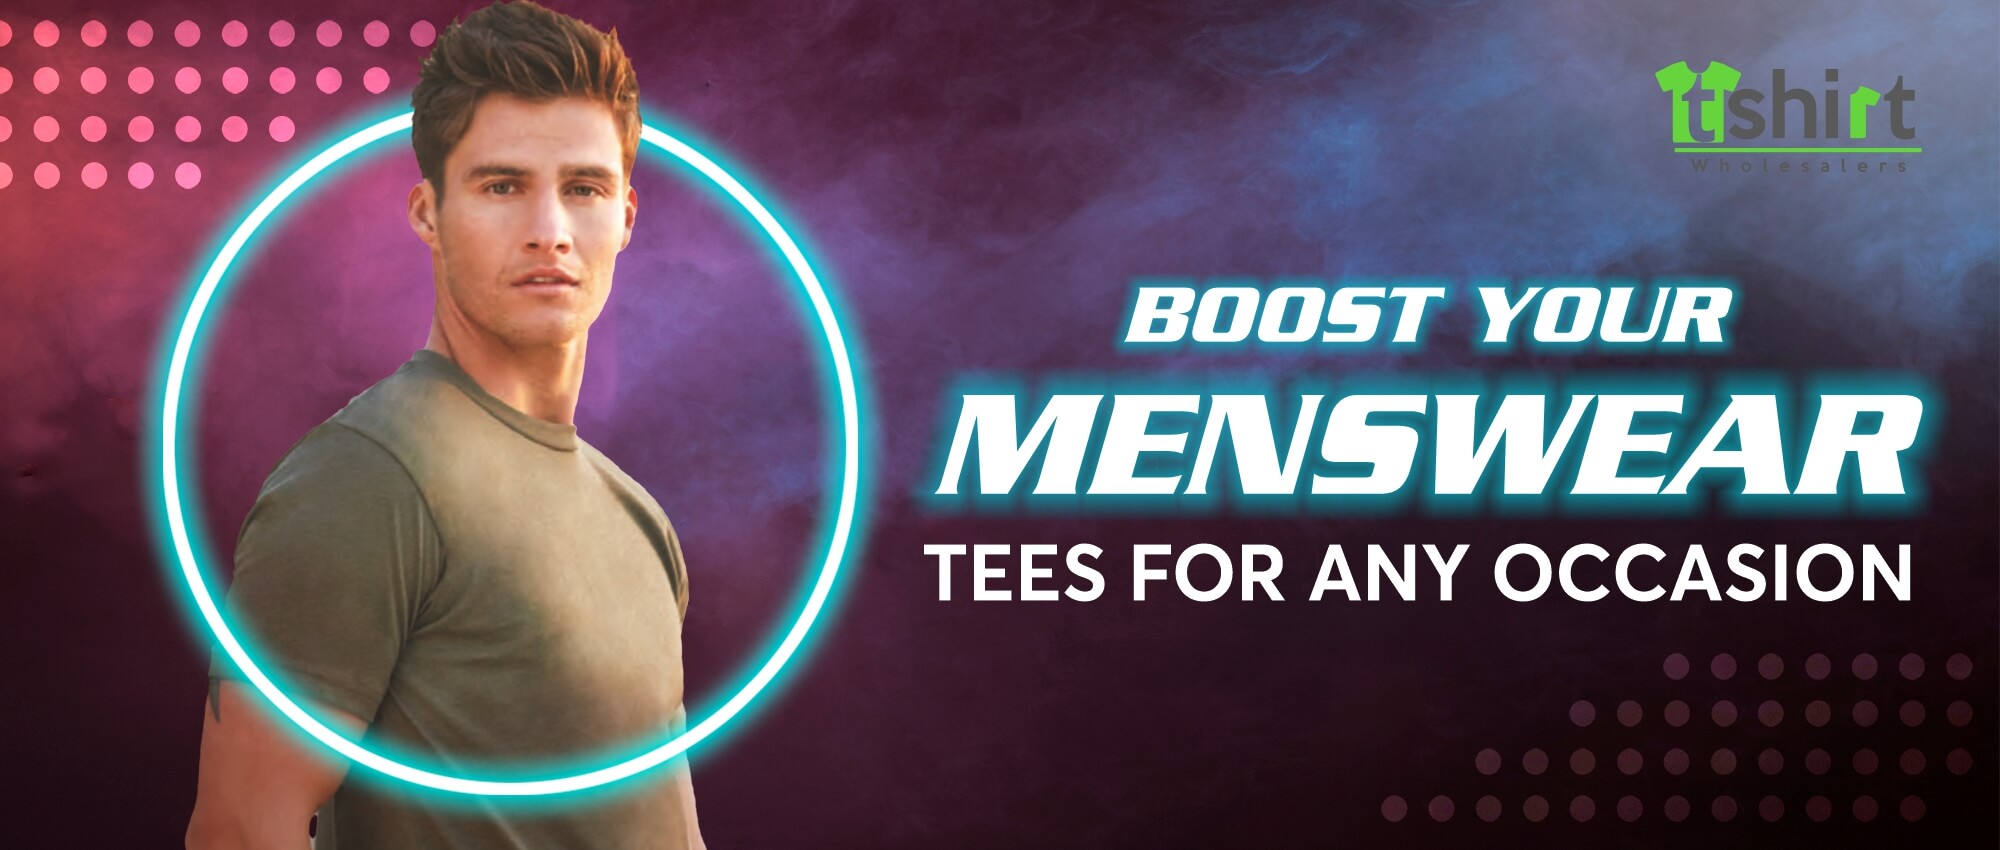 BOOST YOUR MENSWEAR - TEES FOR ANY OCCASION